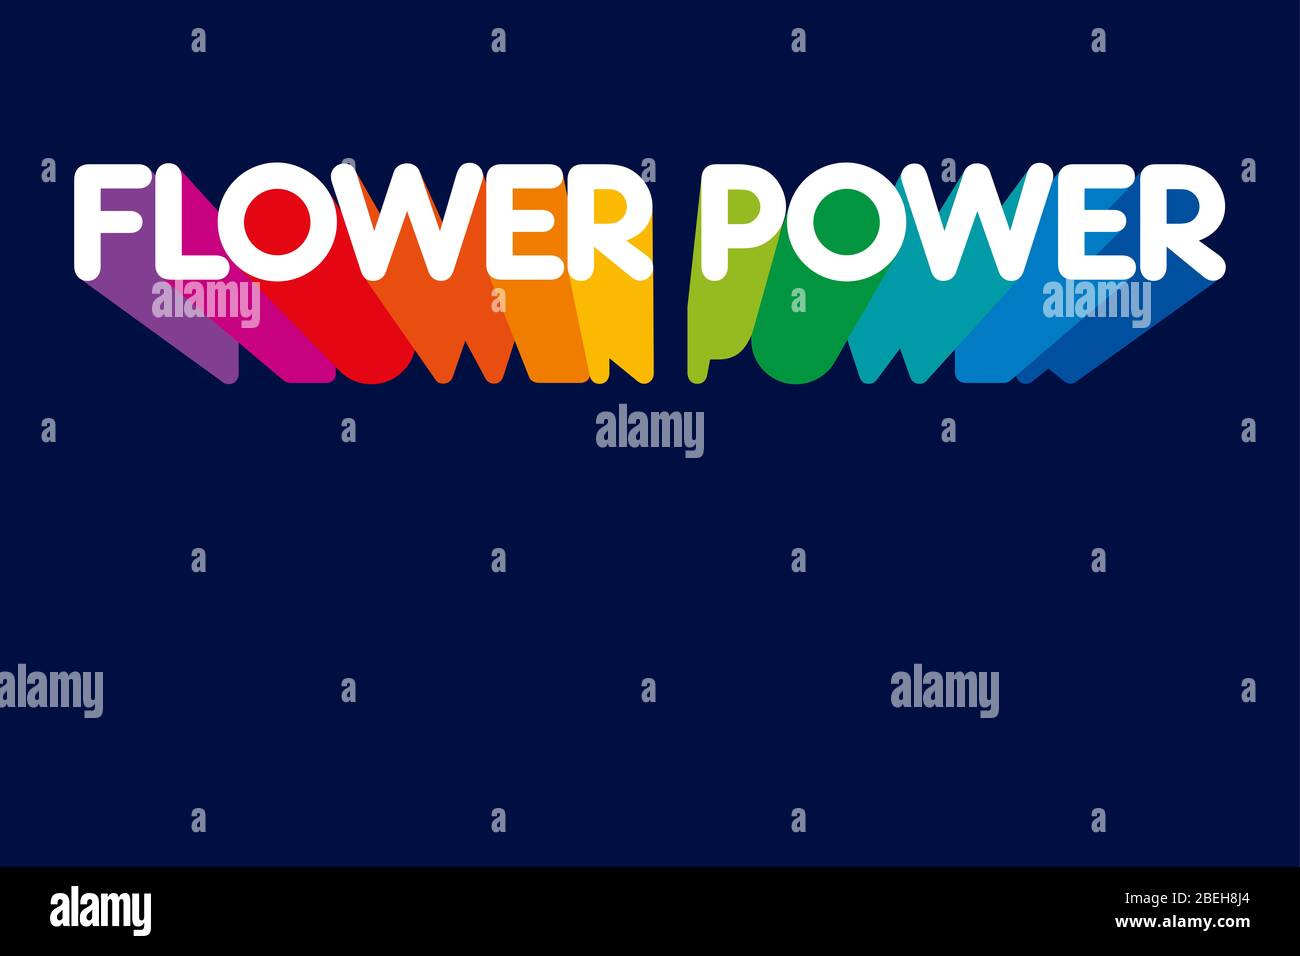 Flower Power lettering with pointing down shadows in rainbow colors. Slogan that was used in the 60s and 70s as a symbol of passive resistance. Stock Photo